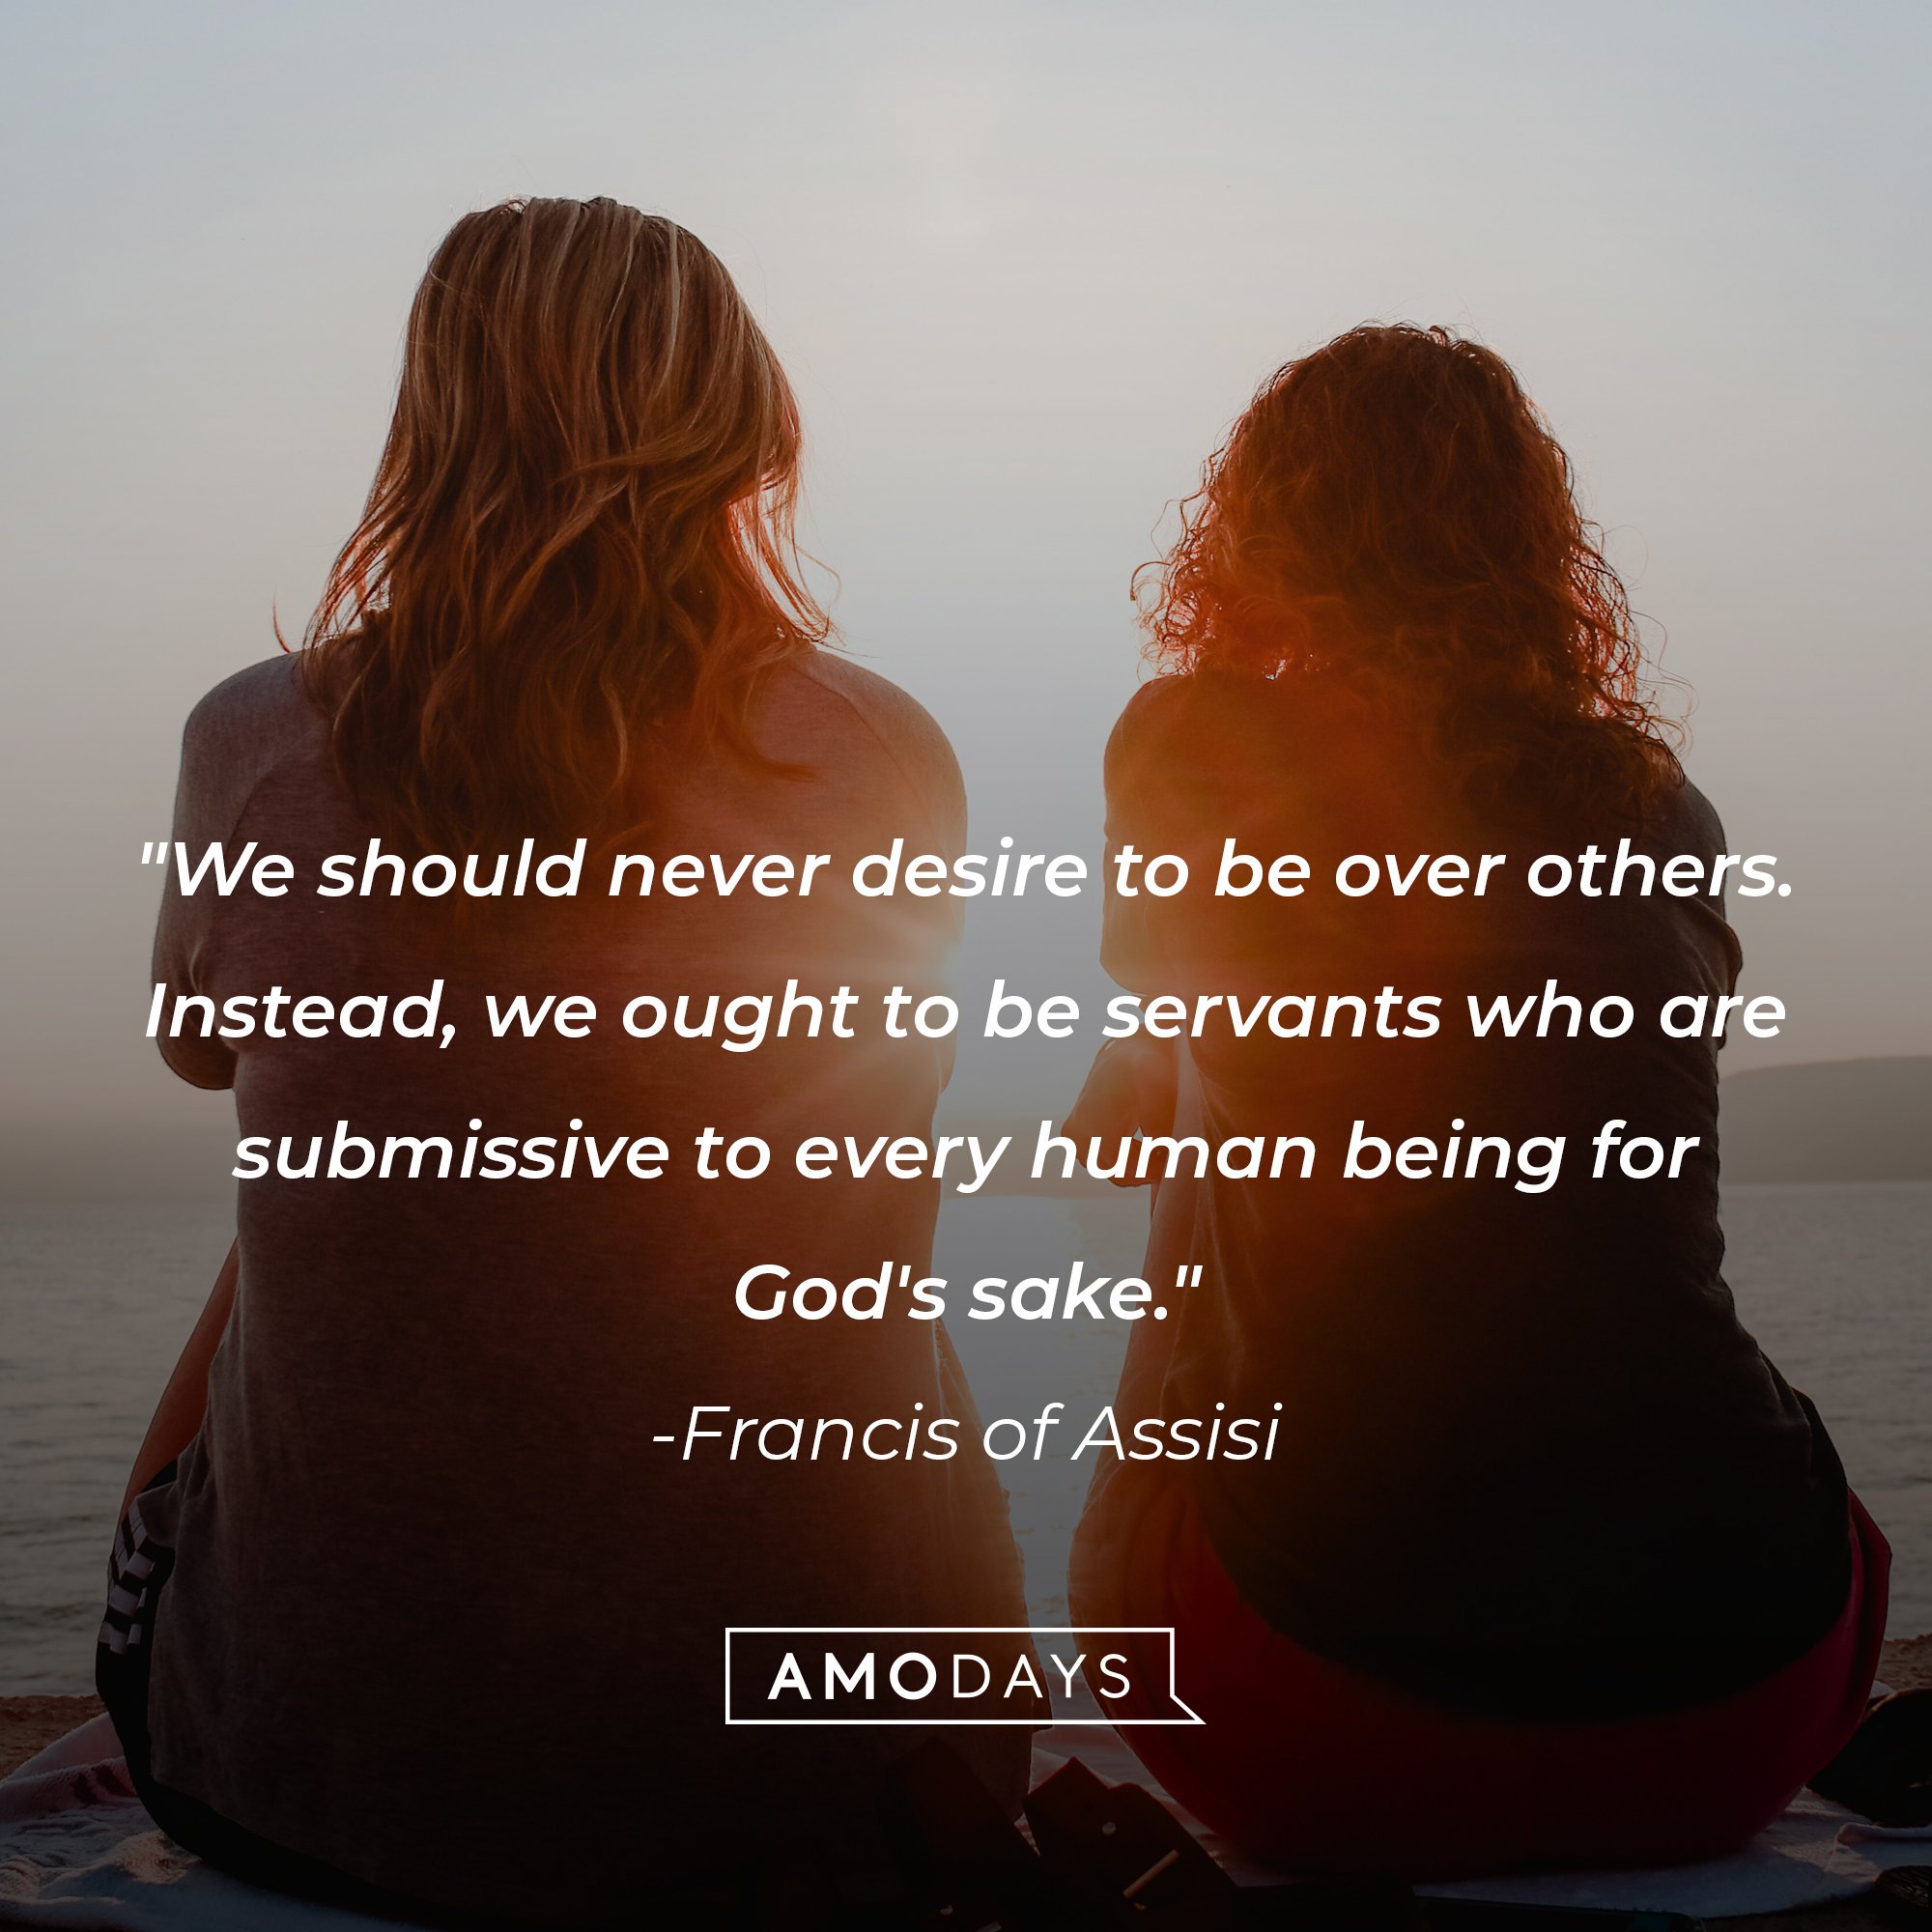 Francis of Assisi’s quote: "We should never desire to be over others. Instead, we ought to be servants who are submissive to every human being for God's sake." | Image: AmoDays 